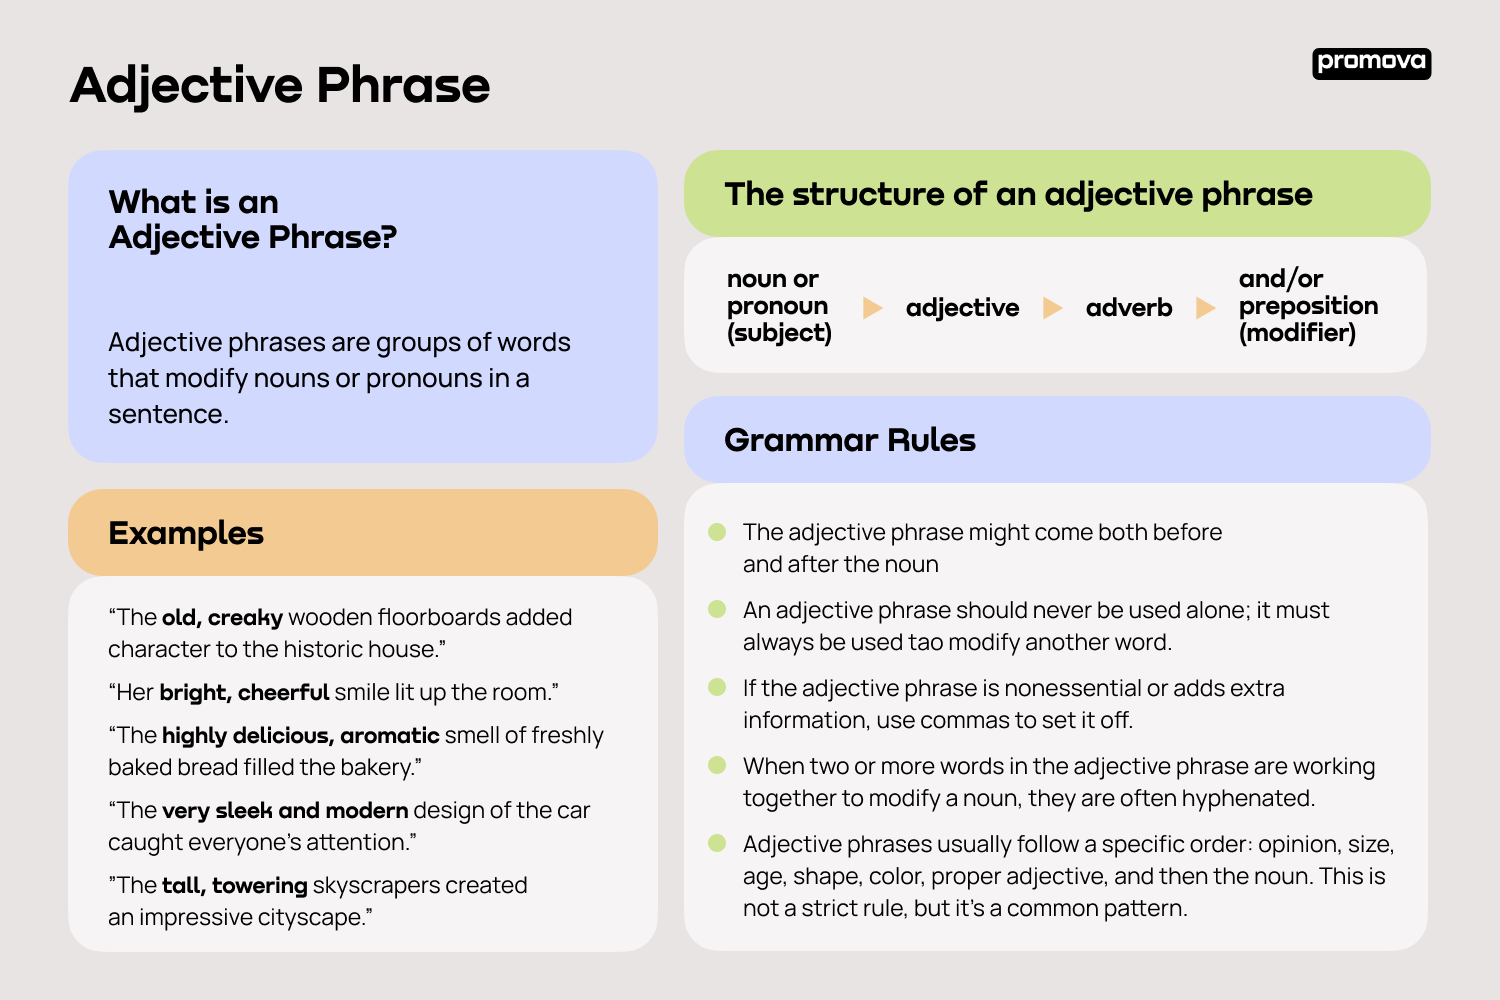 Explore More about Adjective Phrases